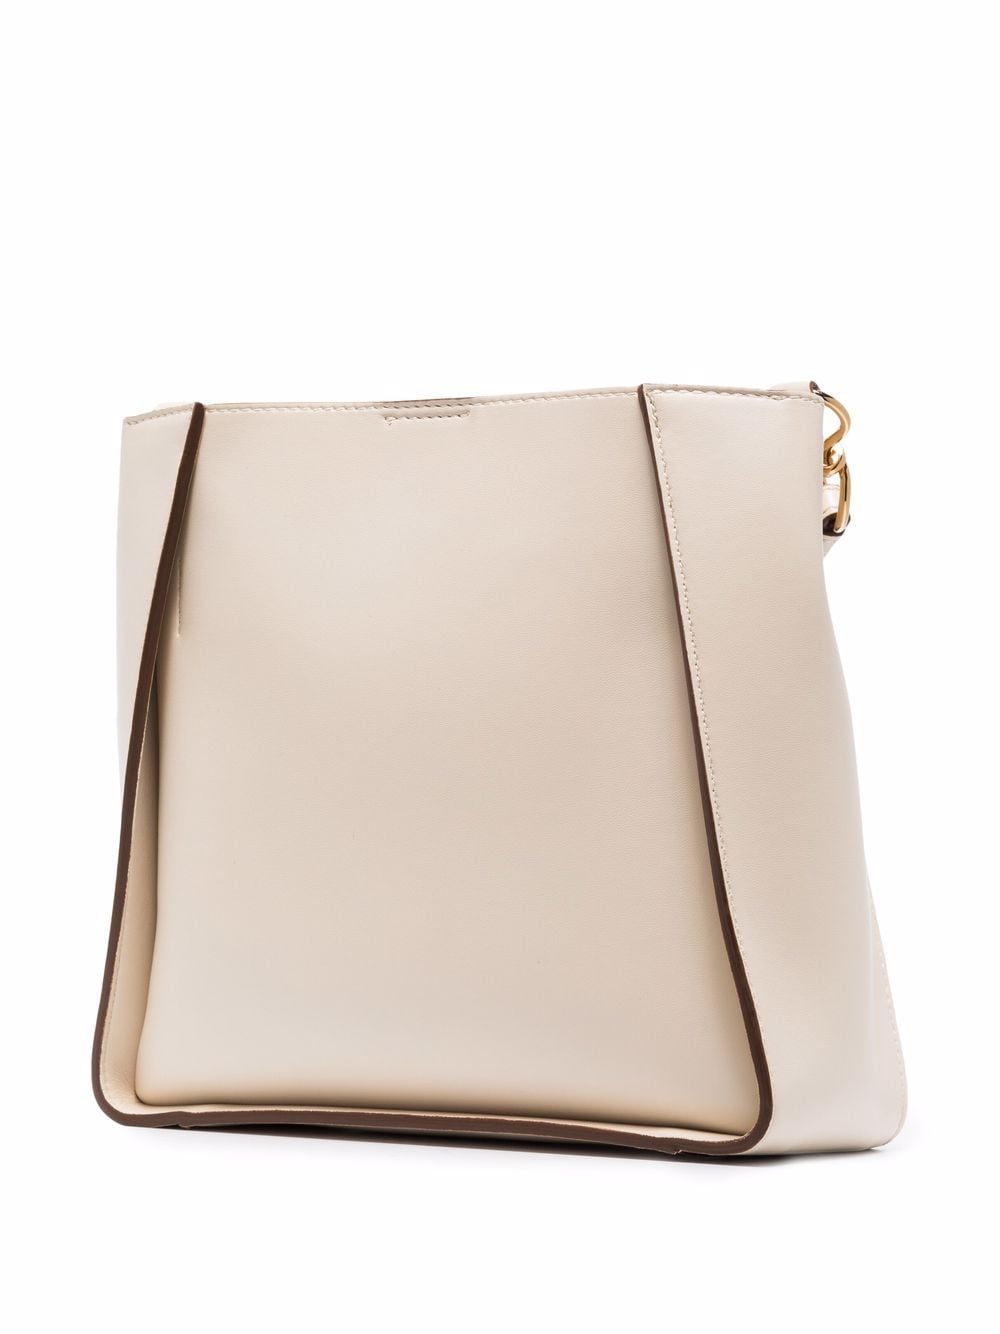 STELLA MCCARTNEY Luxurious and Timeless Cream Faux Leather Shoulder Handbag for Women